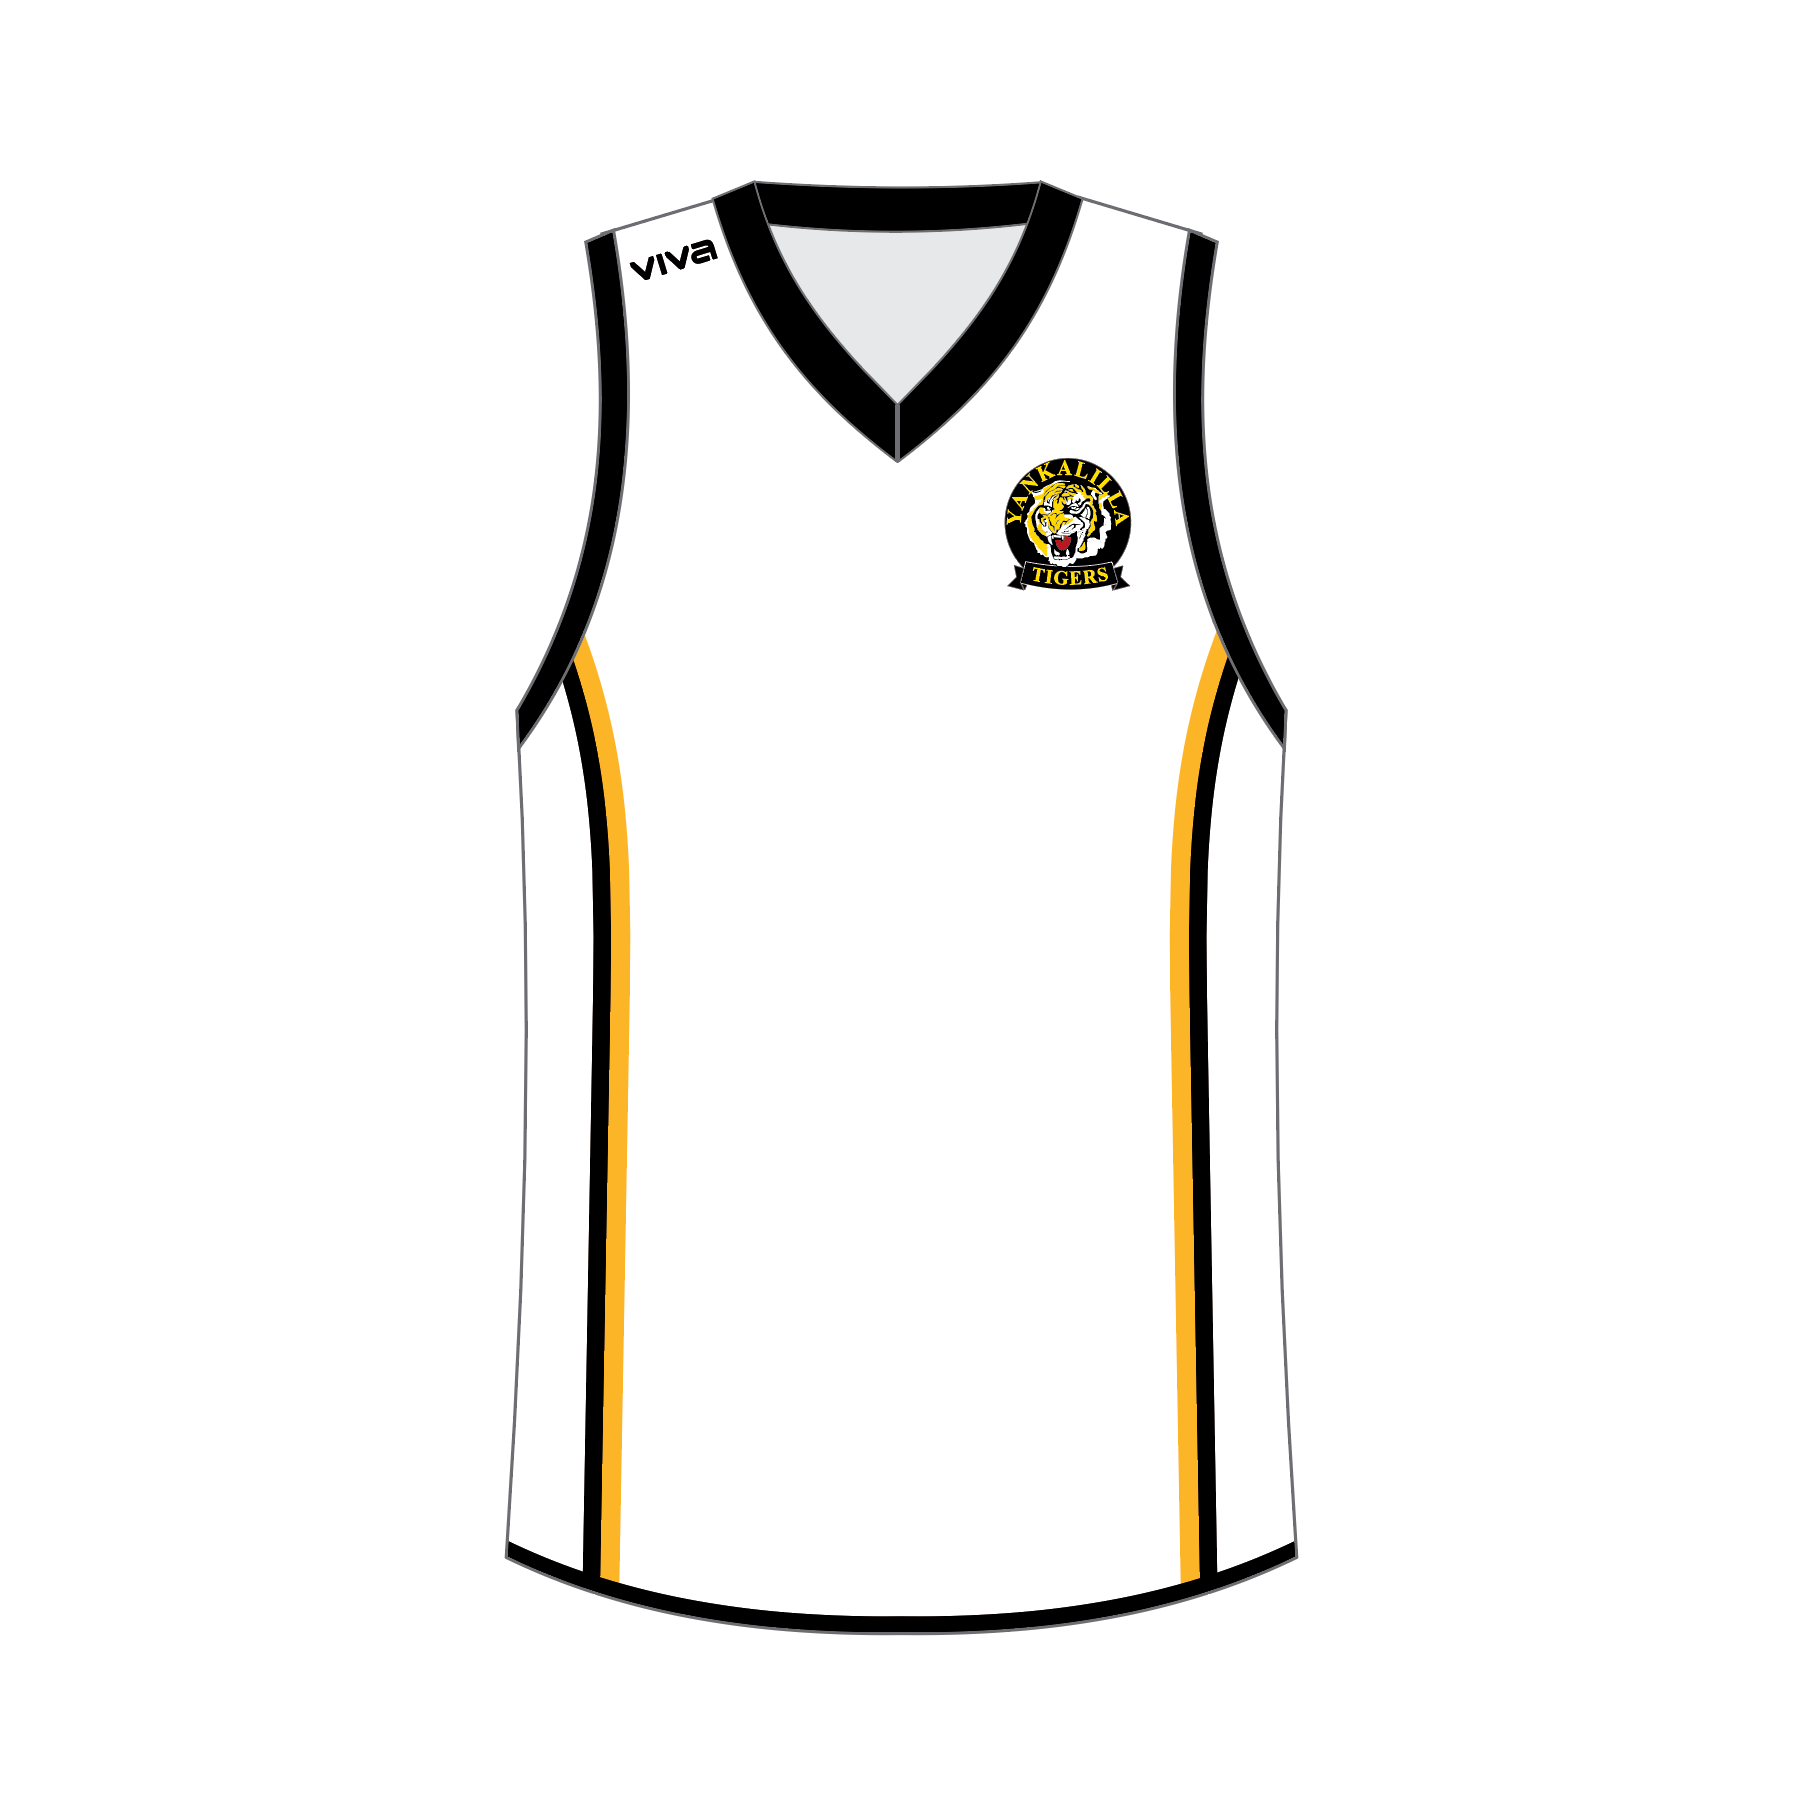 YANKALILLA CRICKET CLUB OFFICIAL ONLINE STORE